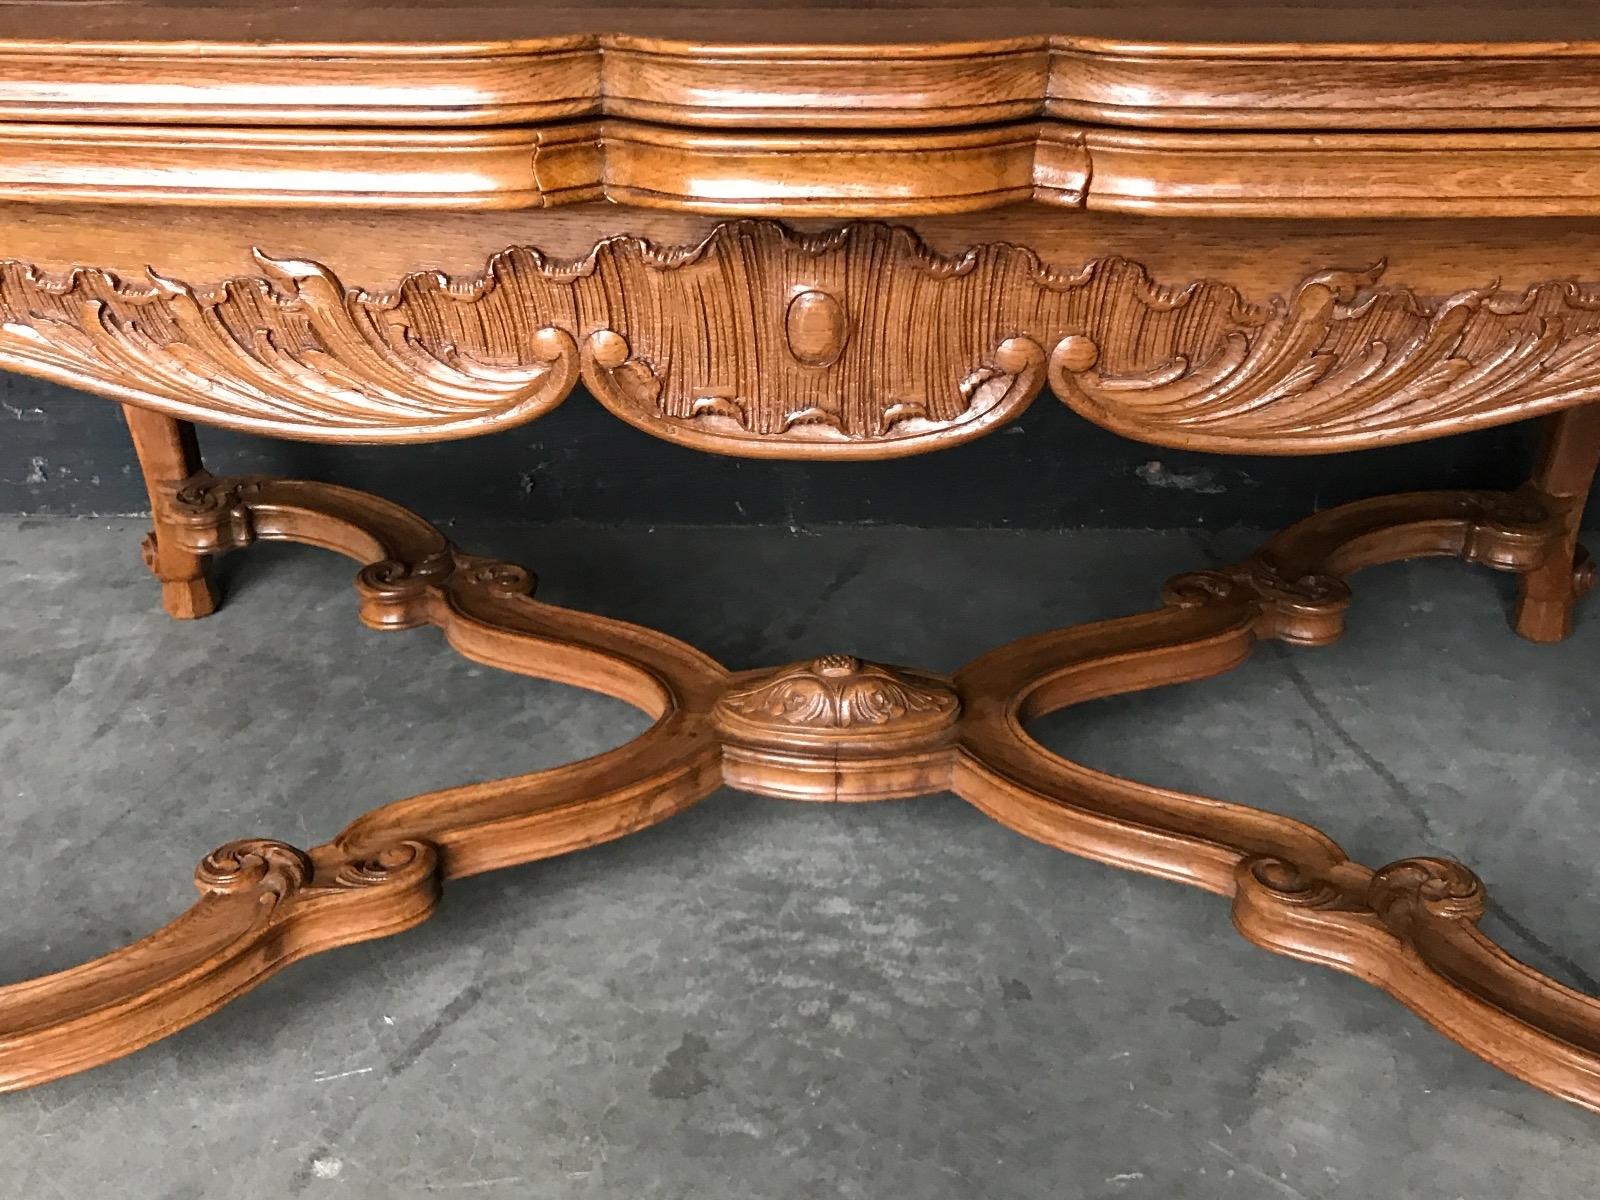 Antique Louis Xv Oak Carved Dining Table And Two Armchairs And Four Chairs Antiques Furnitures Recent Added Items European Antiques Decorative